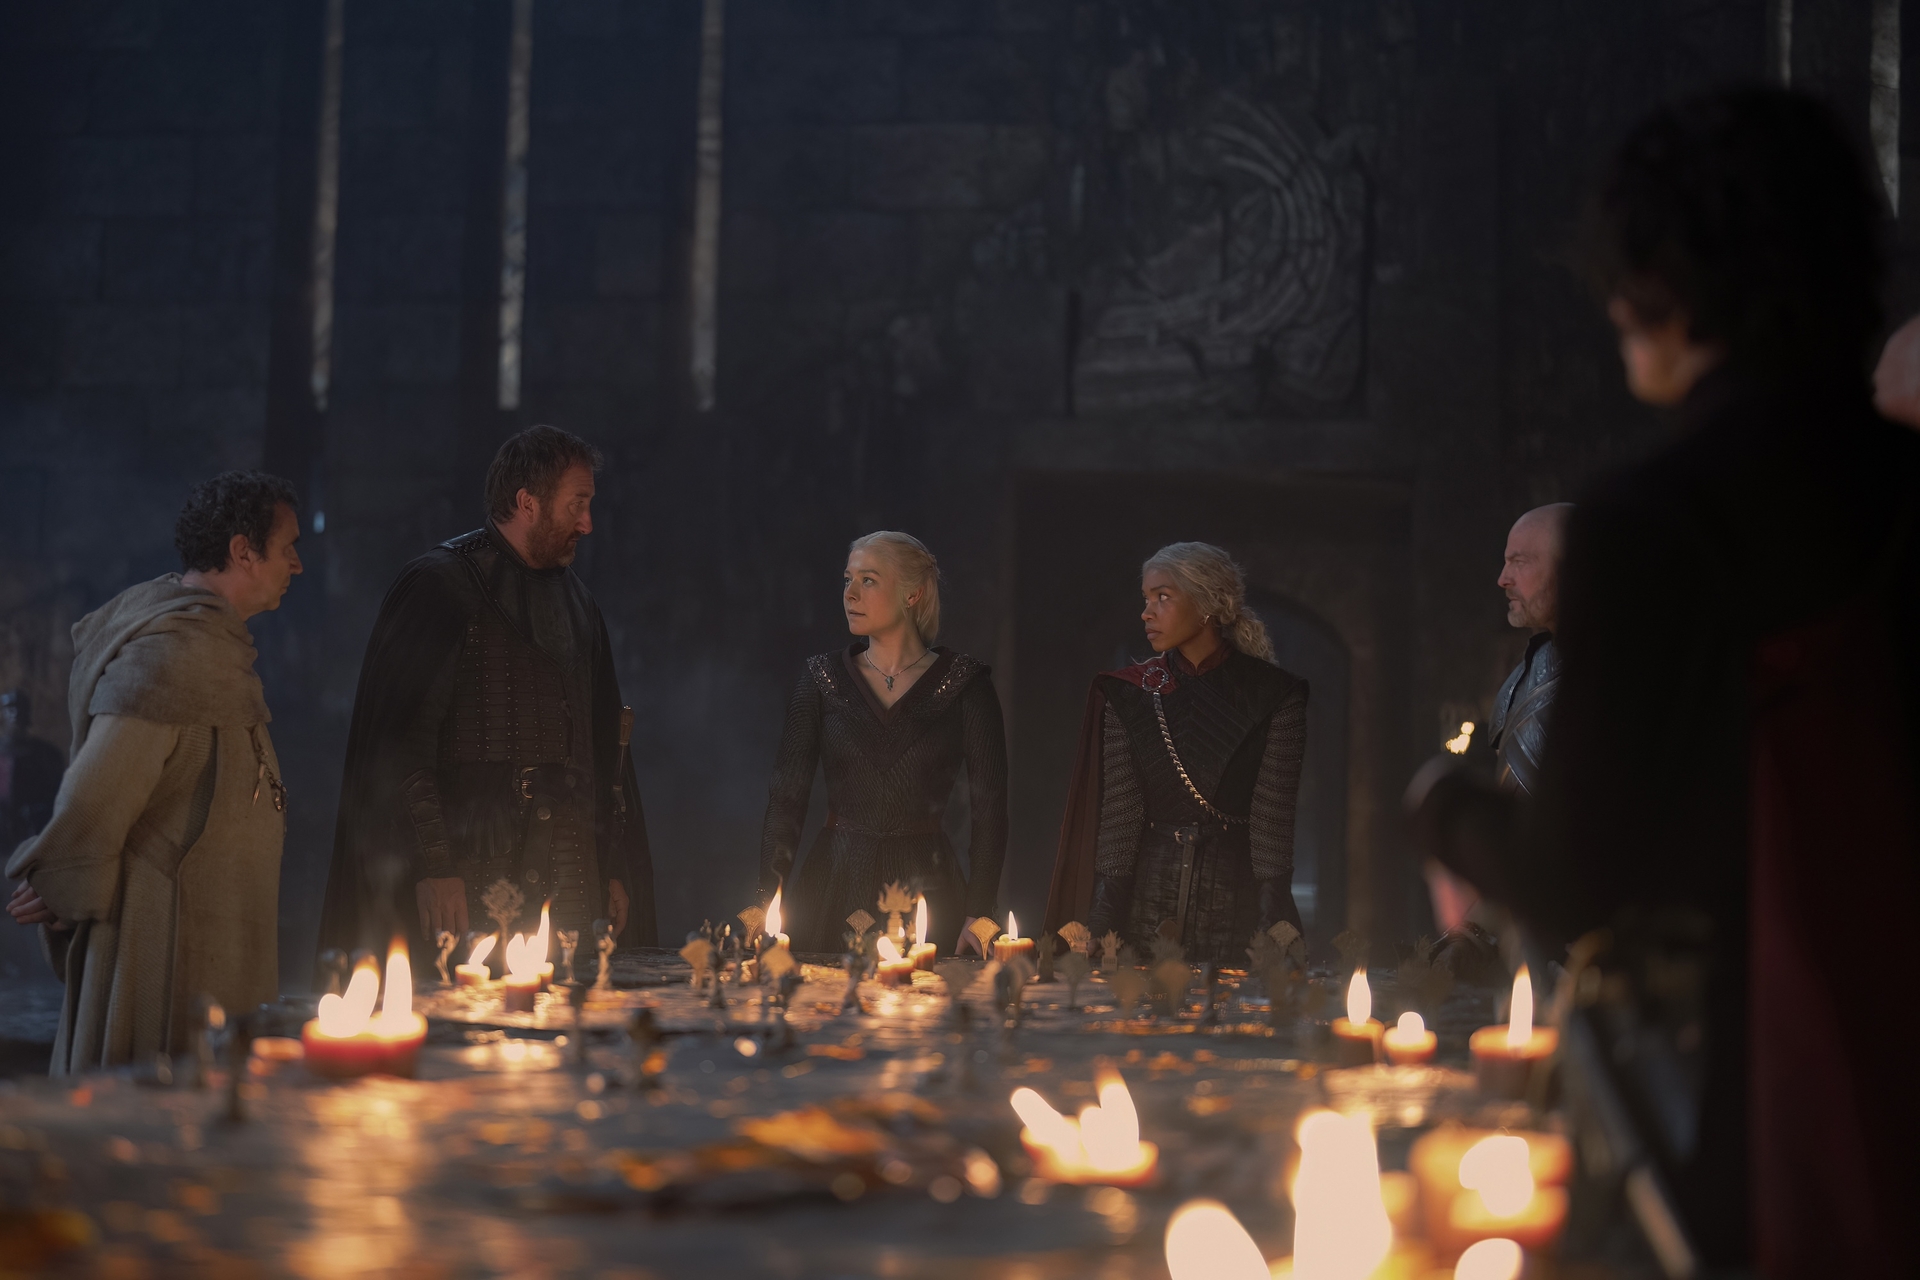 Phil Daniels, Jamie Kenna, Emma D'Arcy, Bethany Antonia, Max Wrottesley, and Harry Collett in George R R Martin and Ryan Condal's HBO action adventure fantasy drama television adaptation, House of the Dragon, Season 2 Episode 3